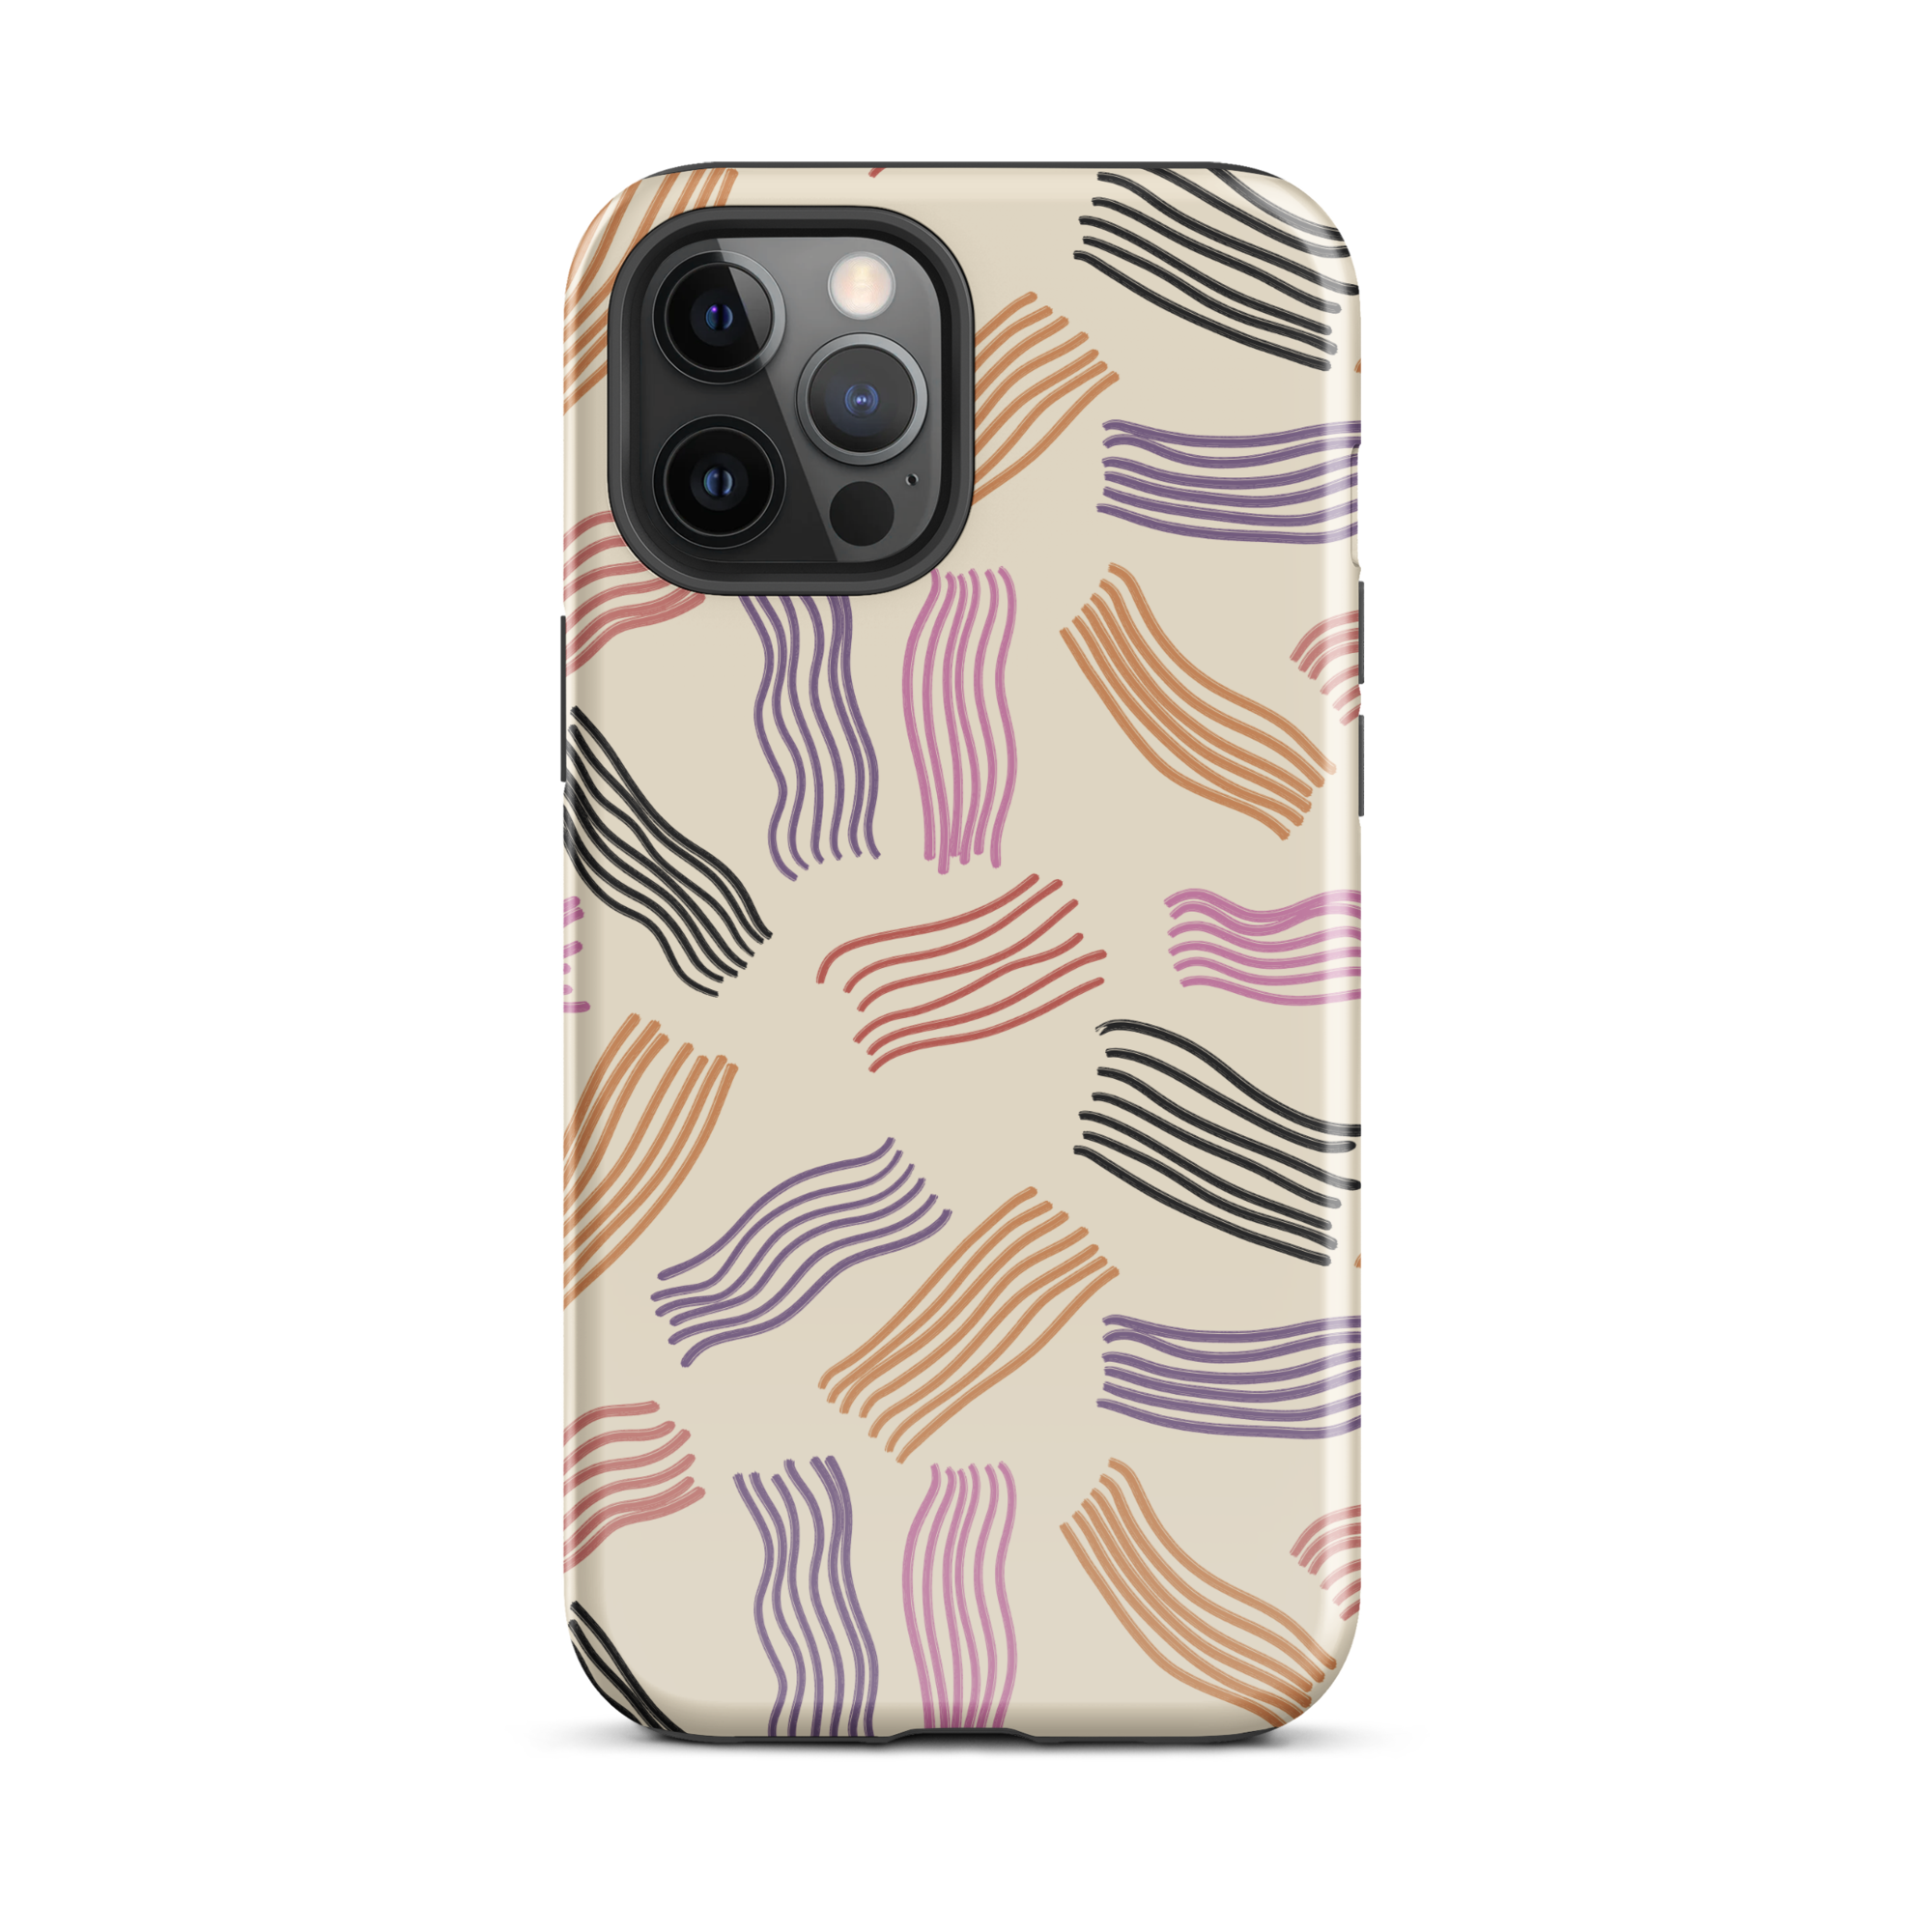 Whimsical Stripes iPhone 12 Pro Max Case